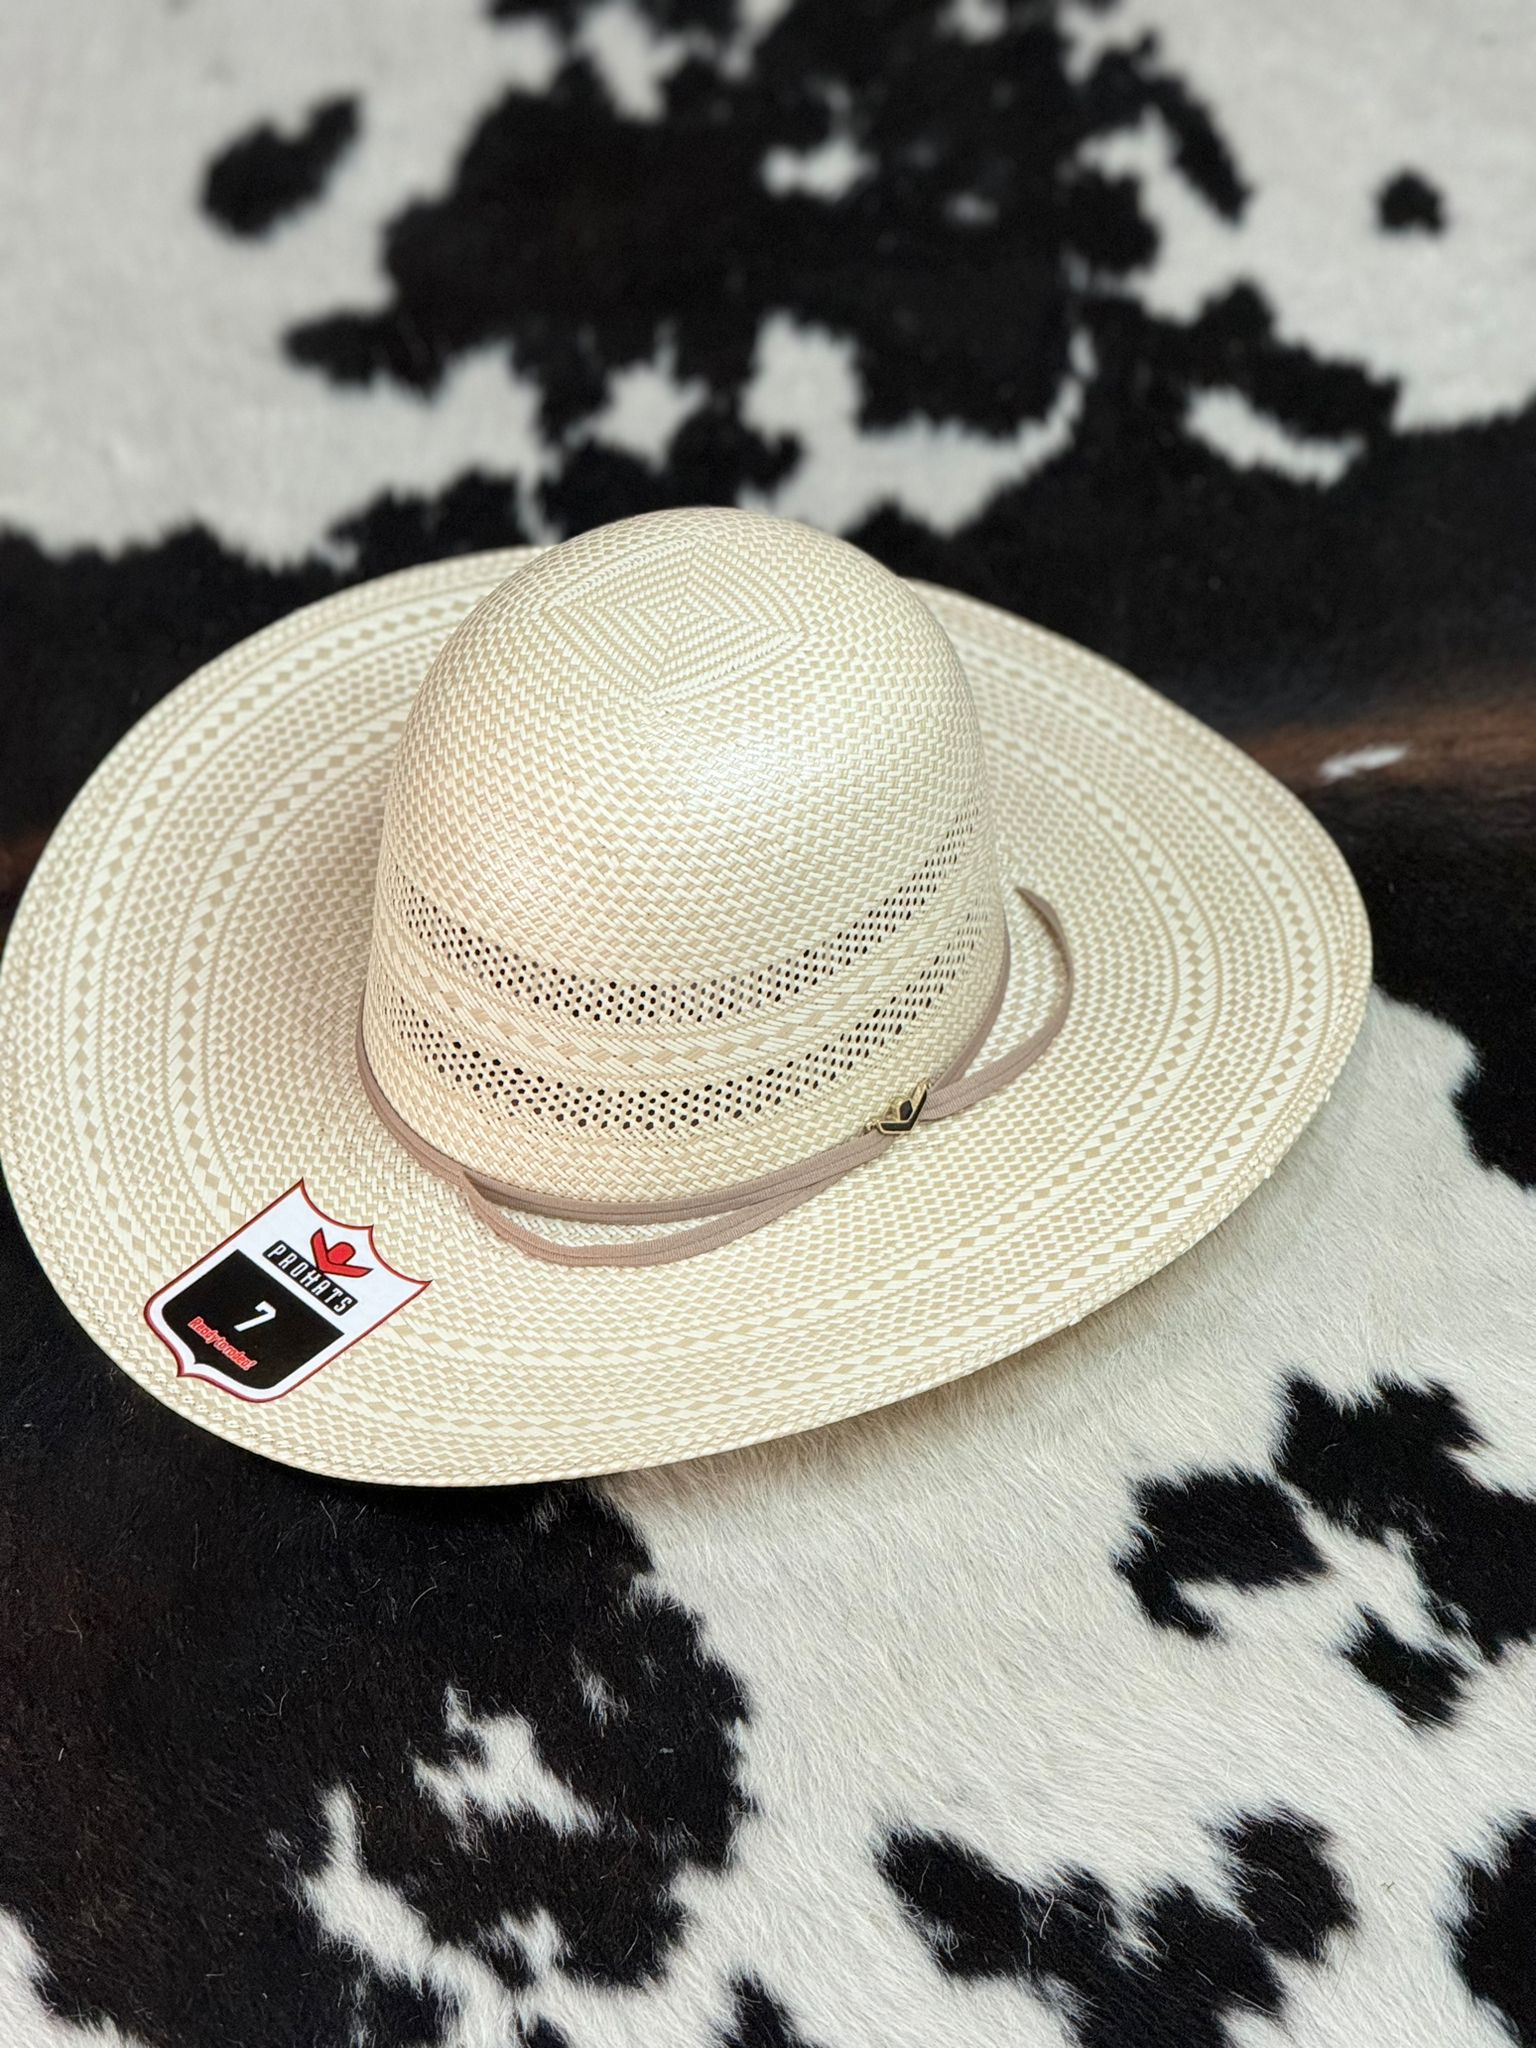 MENS PRO HATS STRAW HAT OPEN CROWN STYLE 1